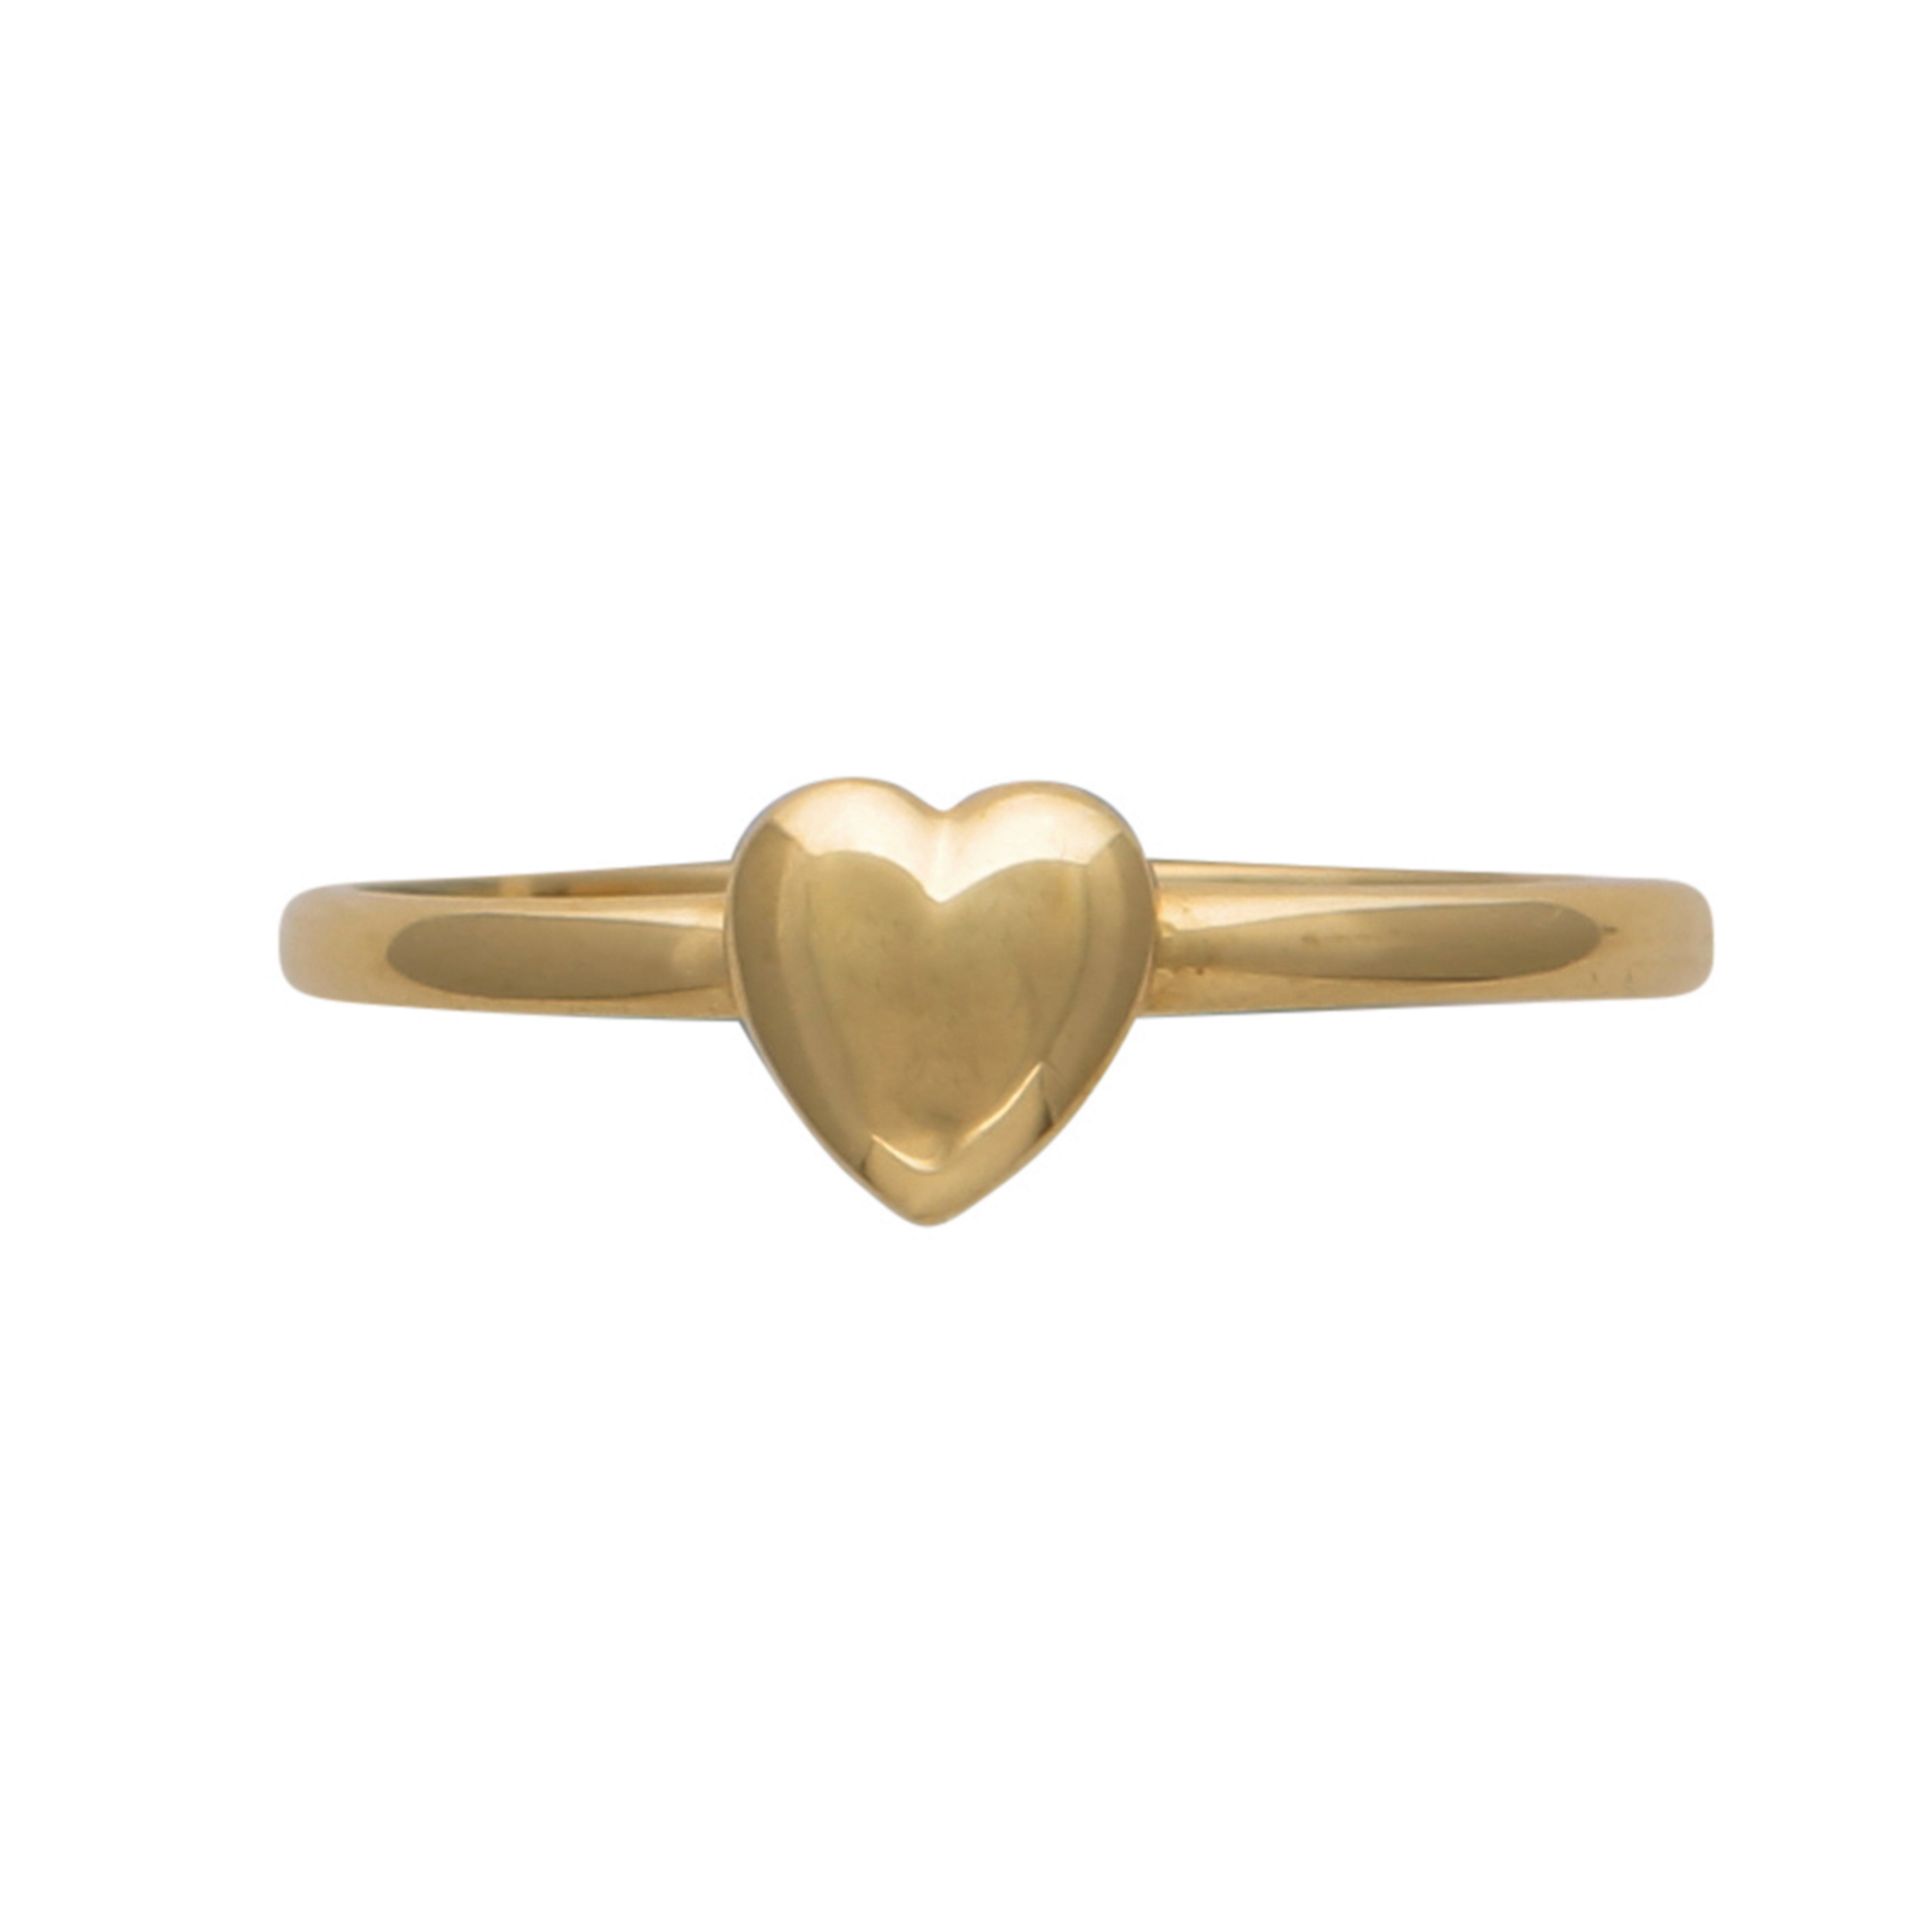 A Pandora style heart charm ring in 14ct yellow gold, designed as a single heart charm measuring 5.